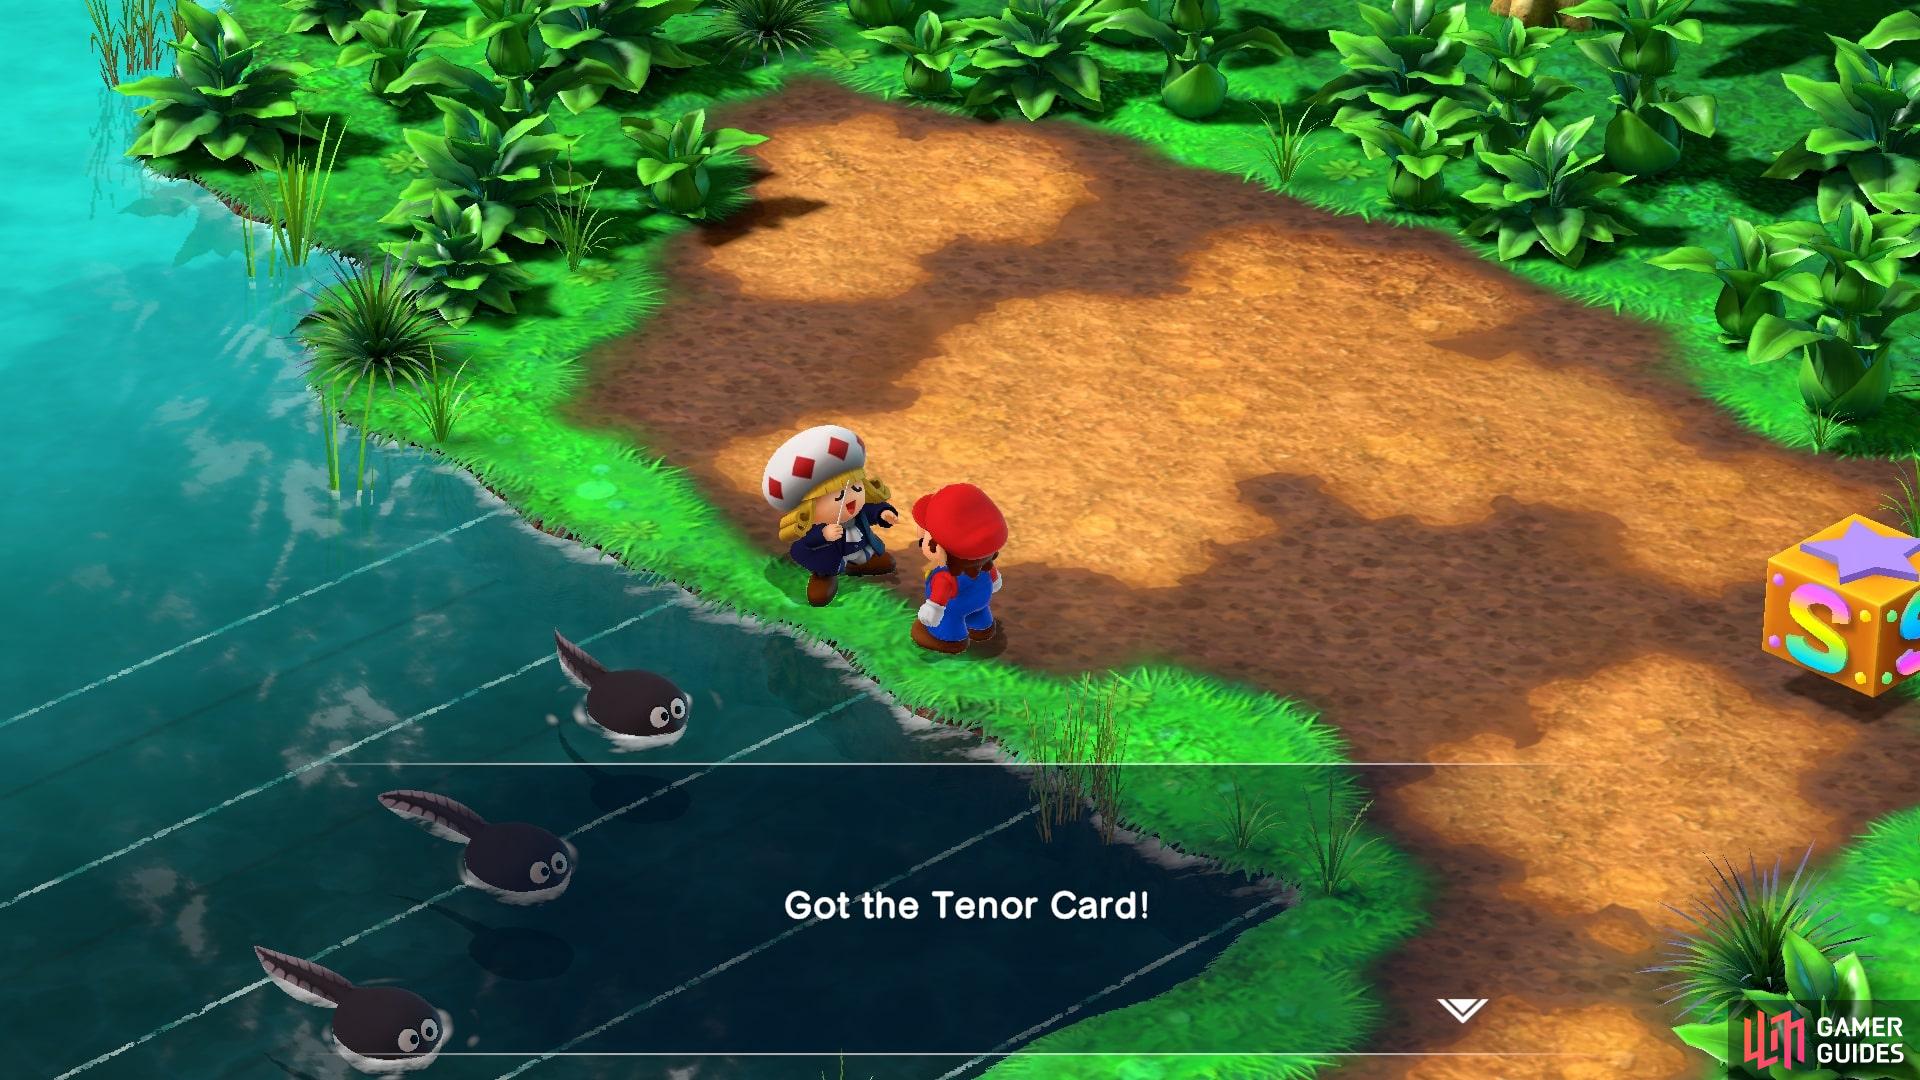 Once you finish Toadofsky will give you the Tenor Card.